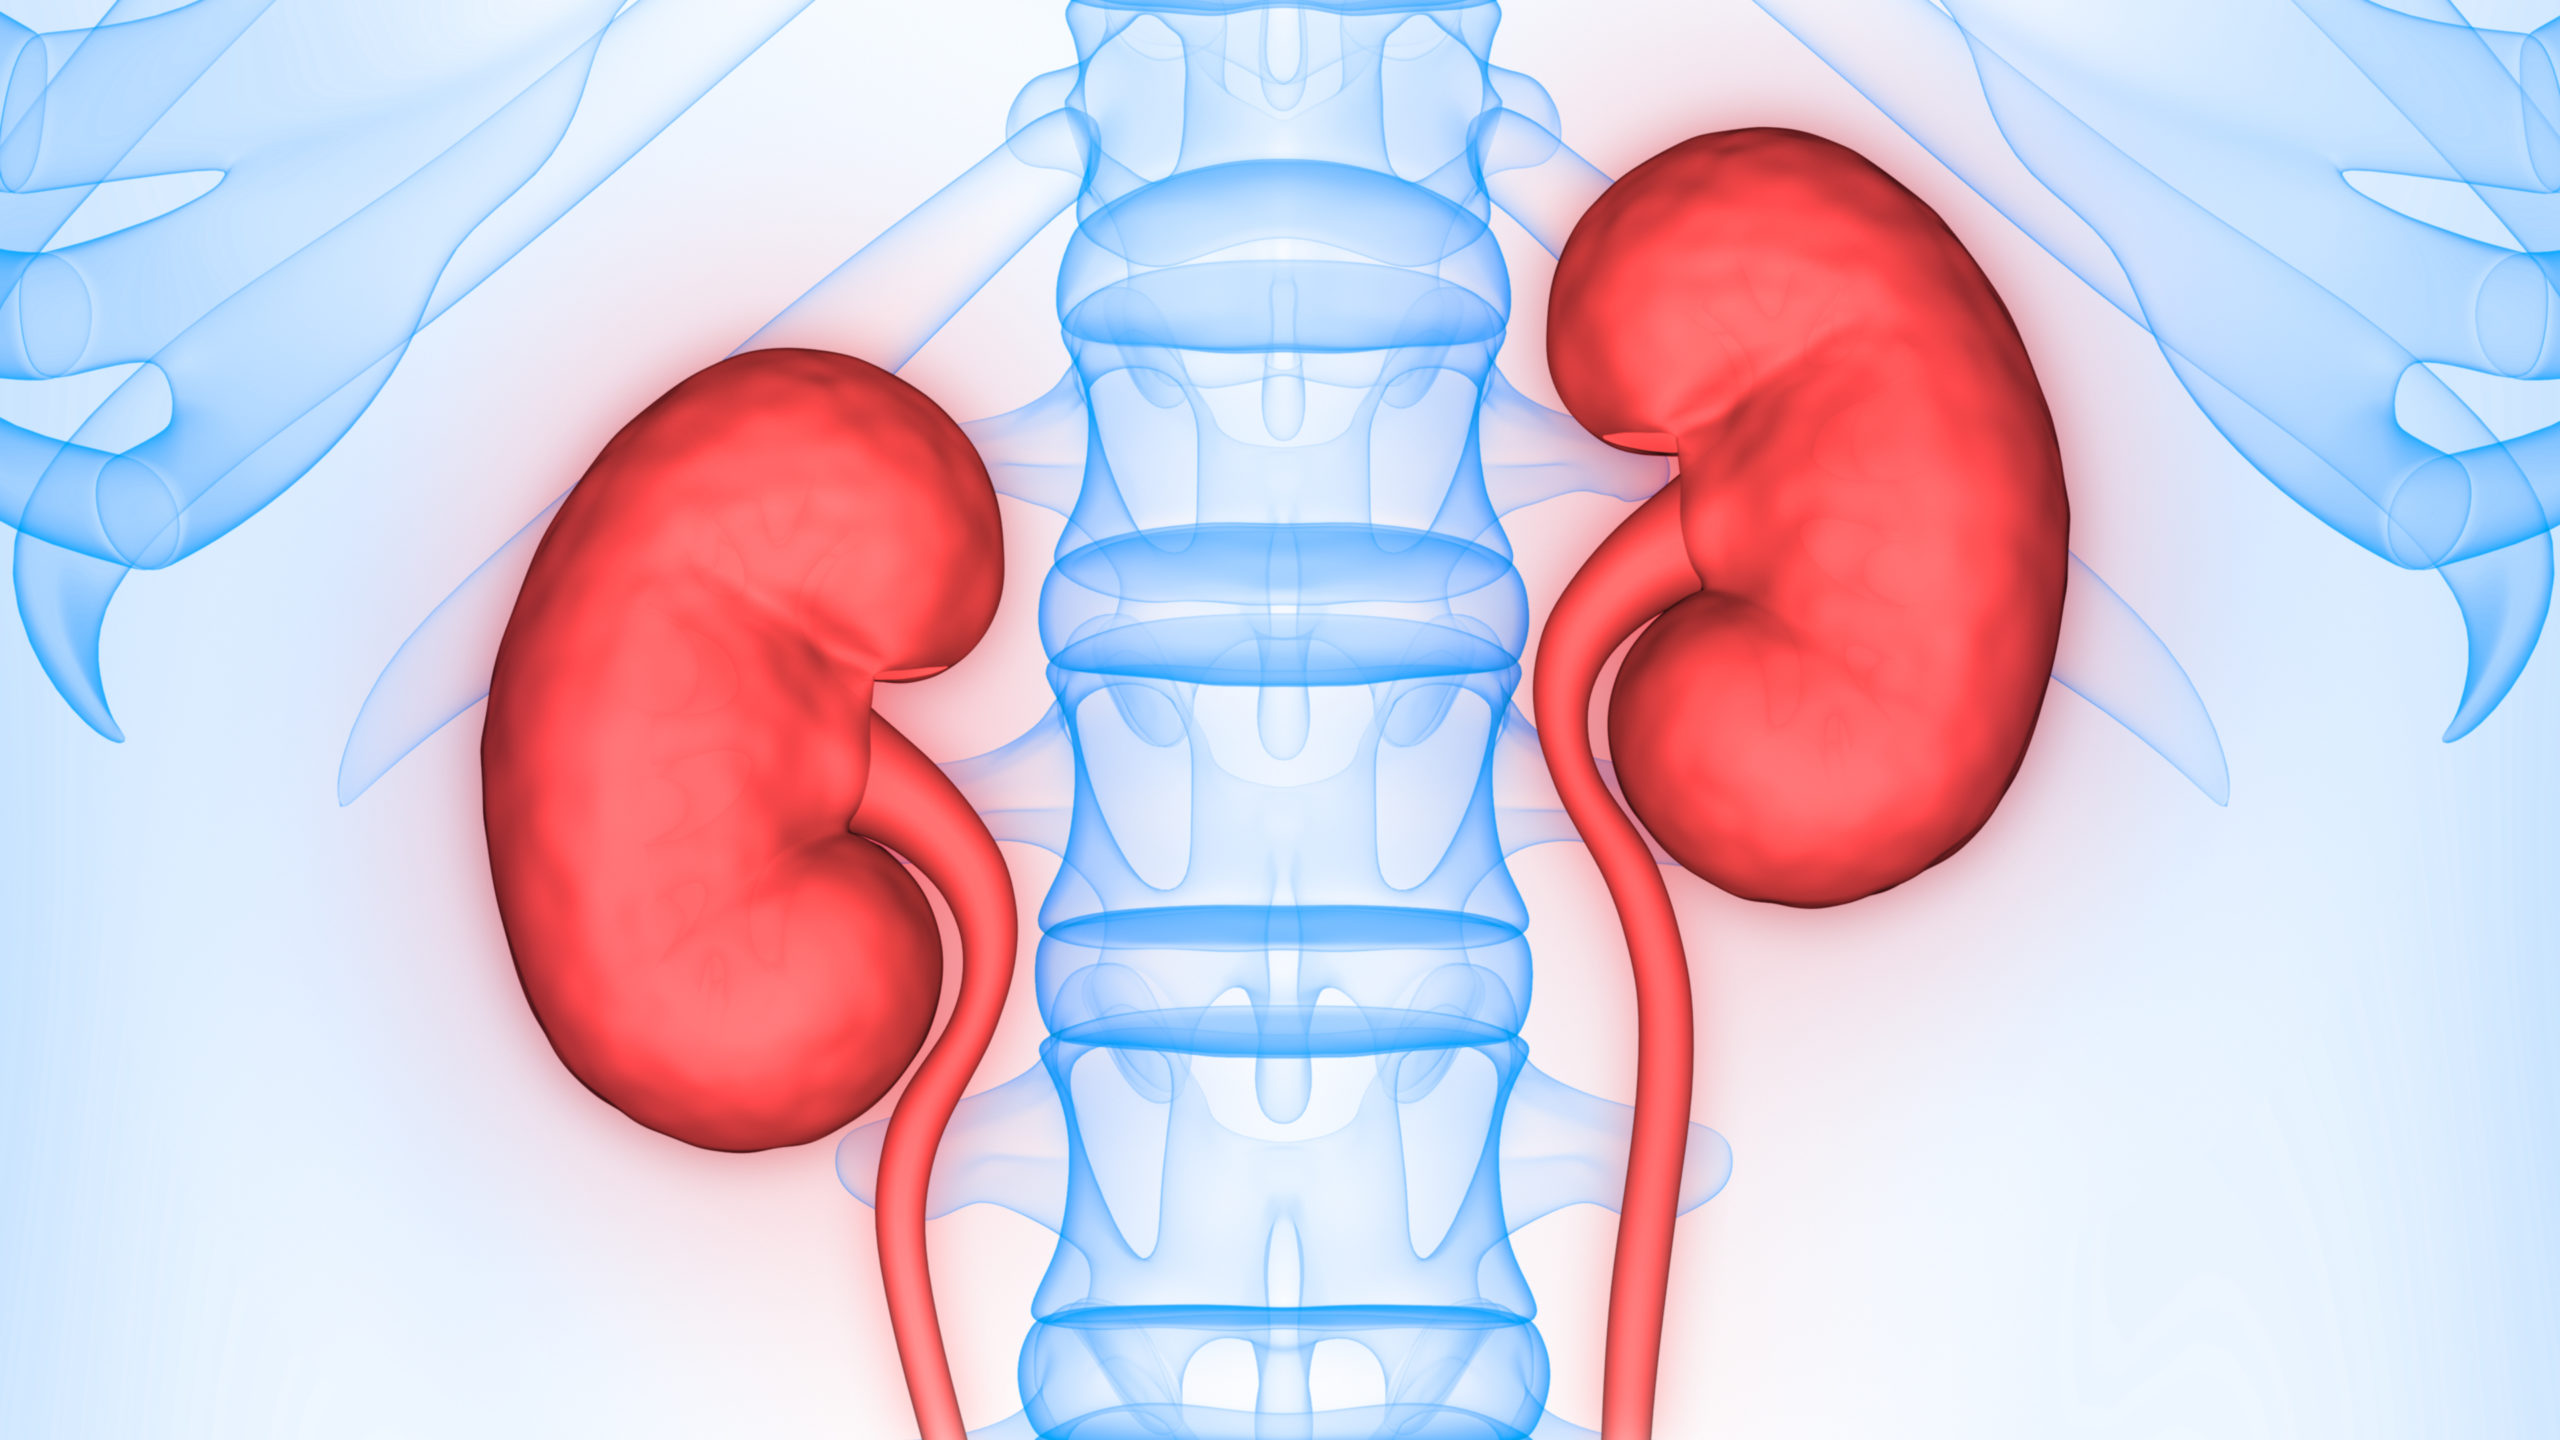 A rendering of kidneys next to spine